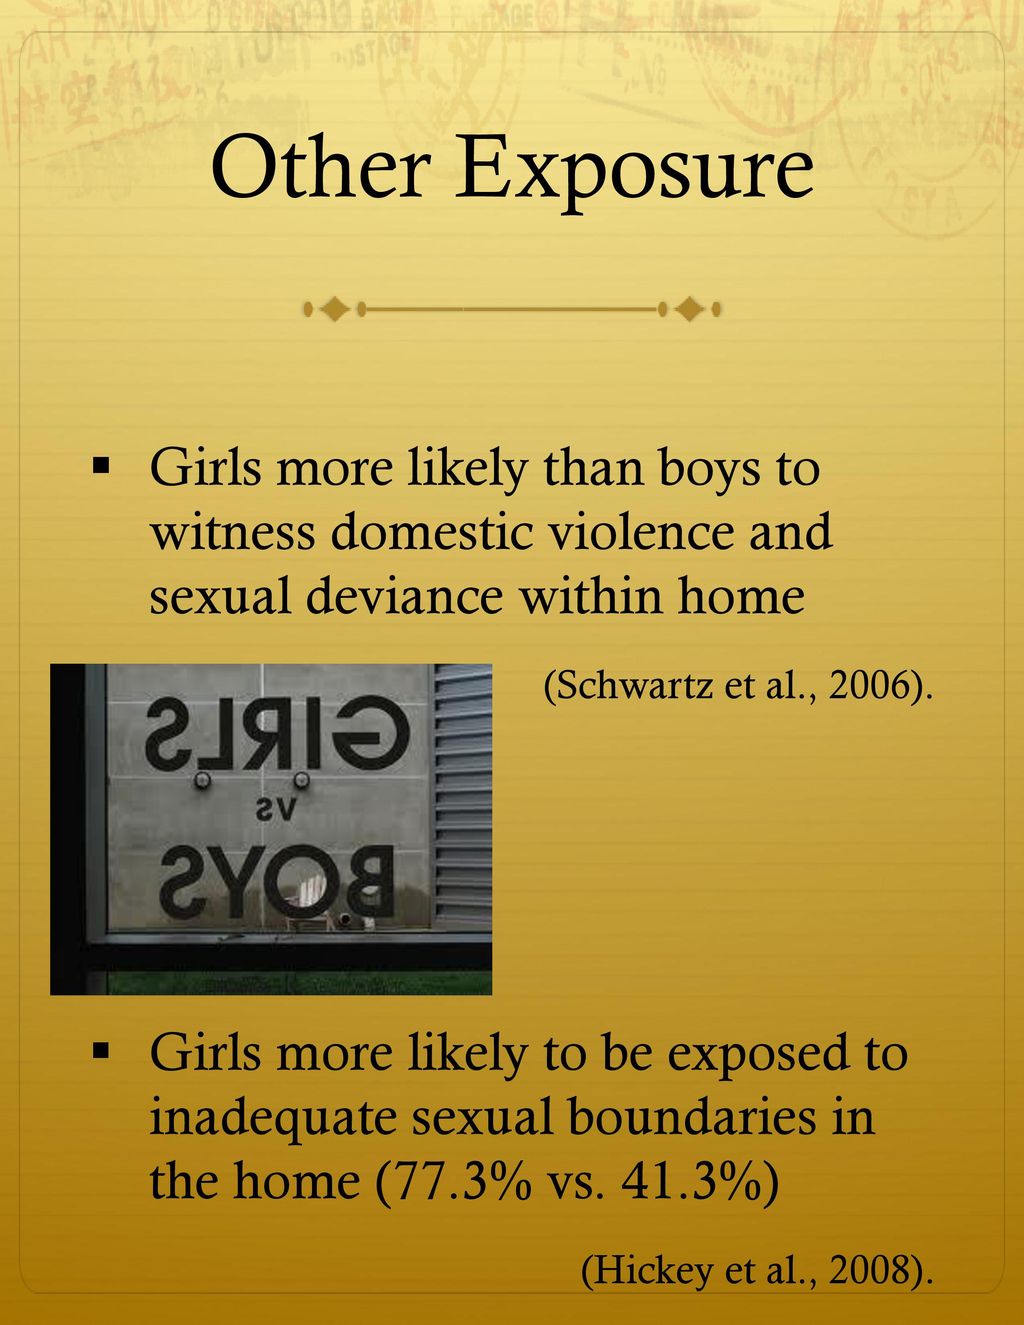 6/9/2018 Other Exposure. Girls more likely than boys to witness domestic violence and sexual deviance within home.